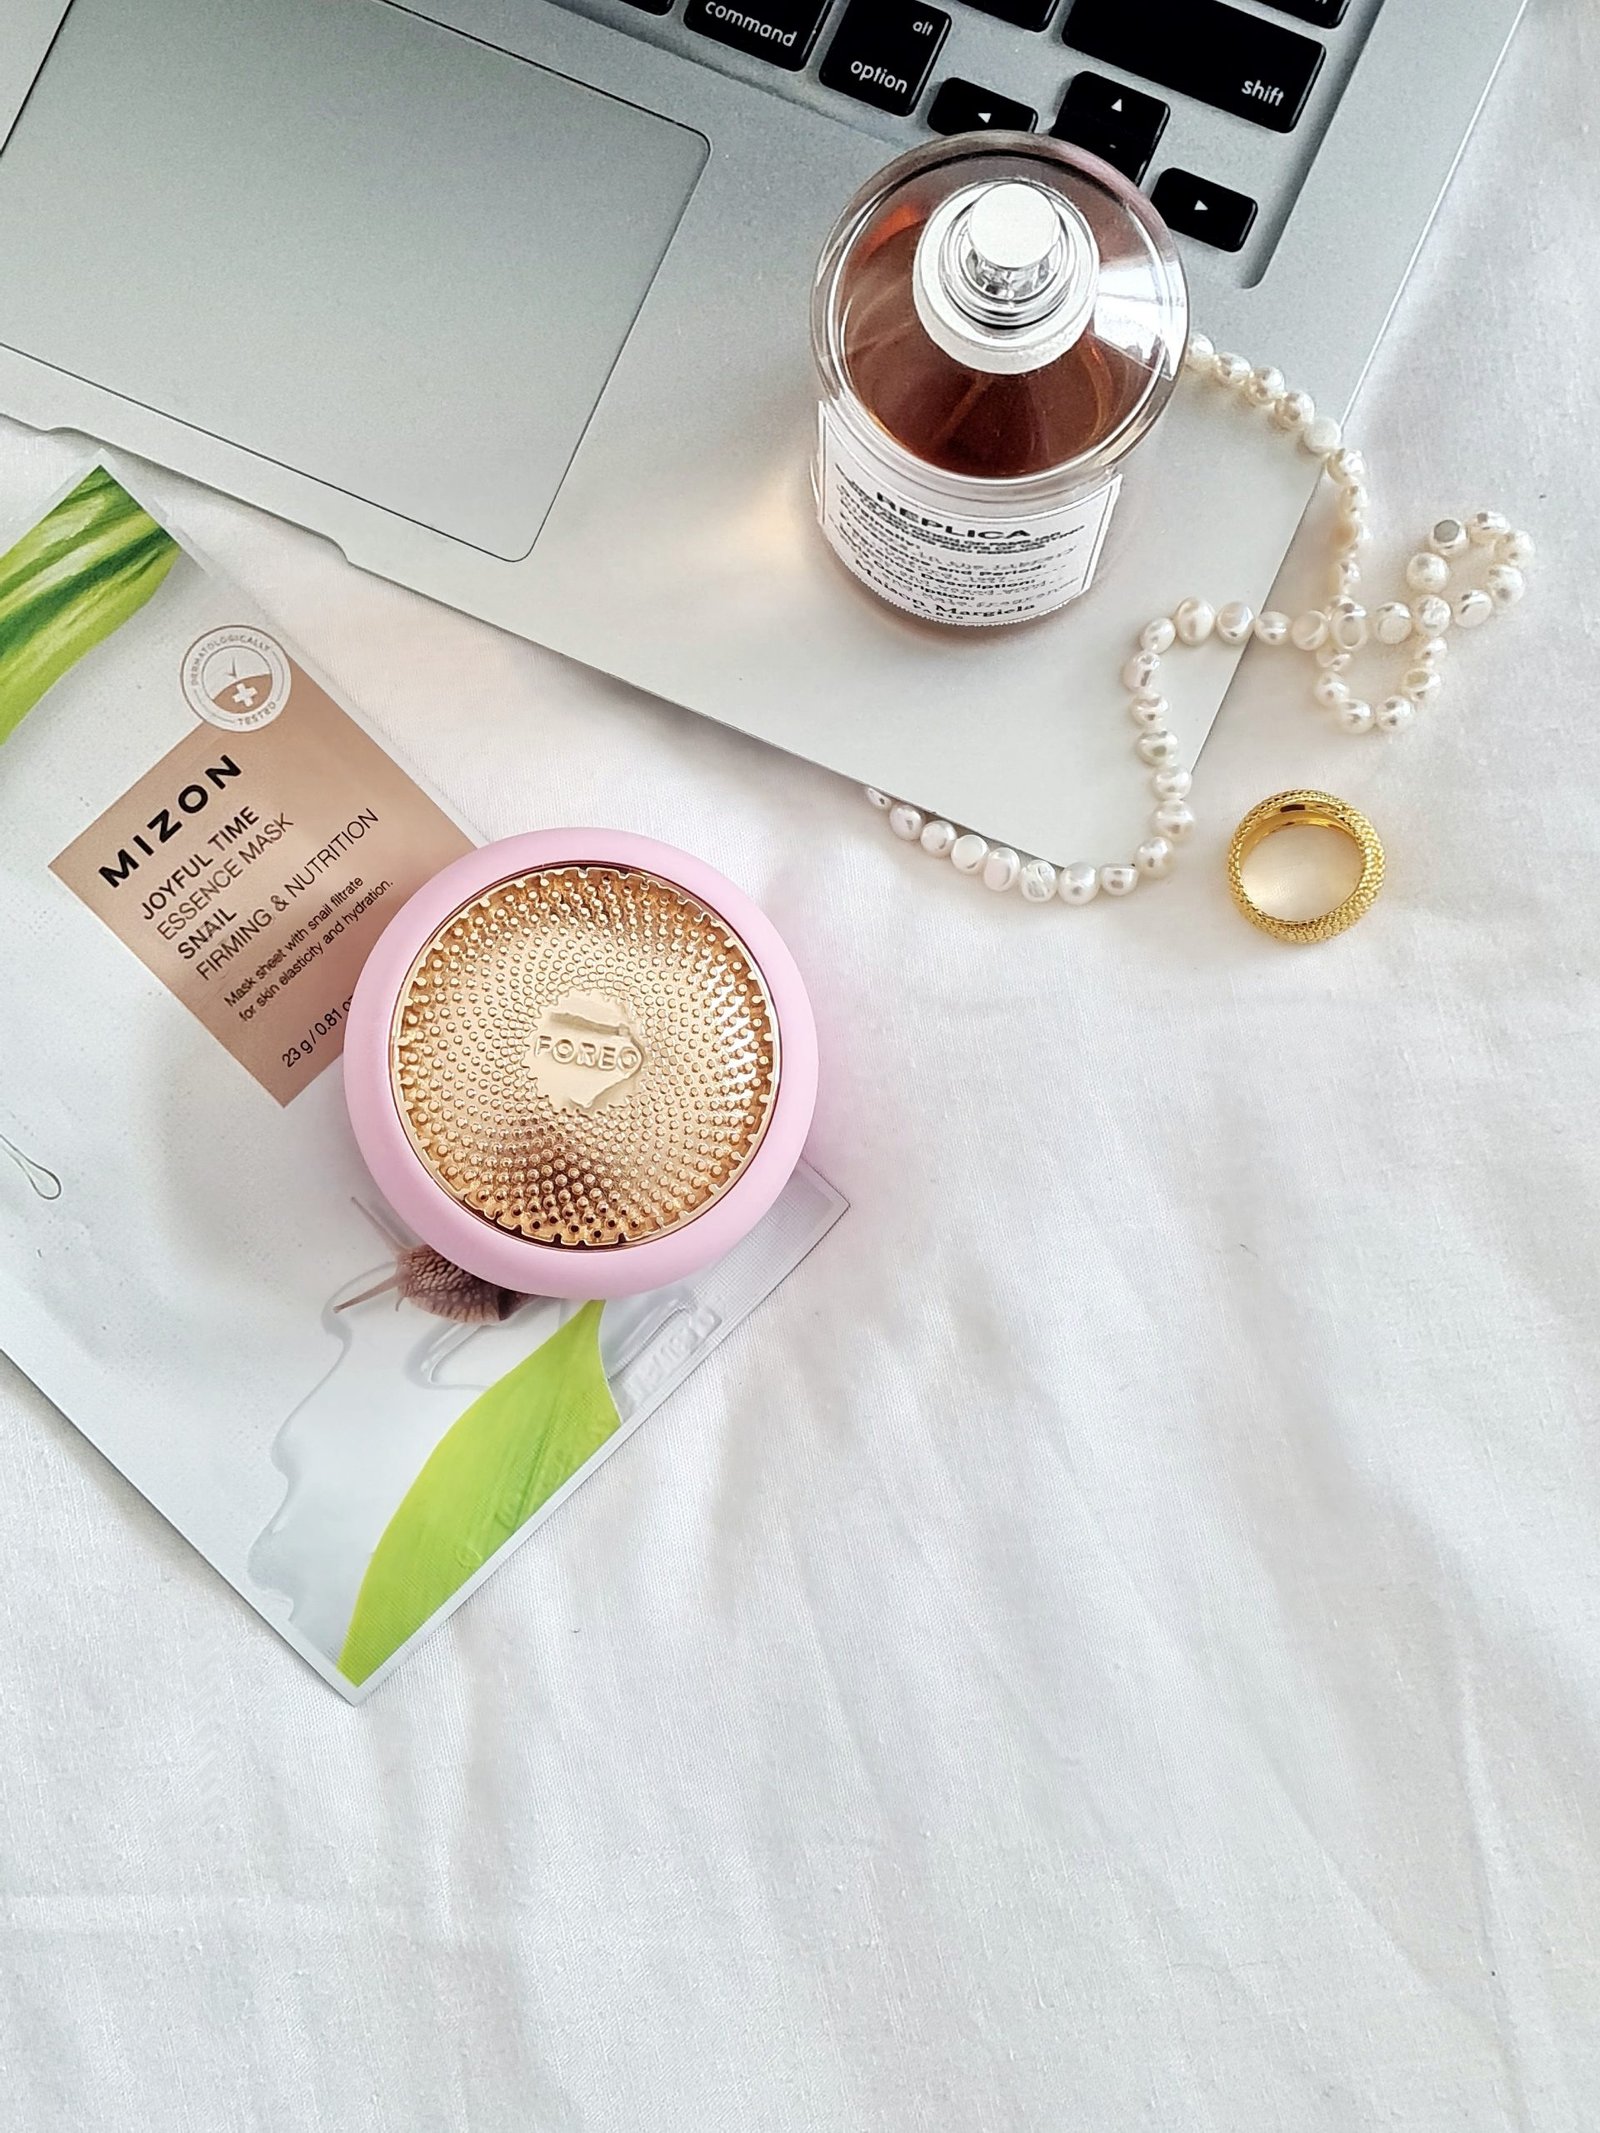 Light Up Your Beauty Routine with the Latest LED Mask Trend!